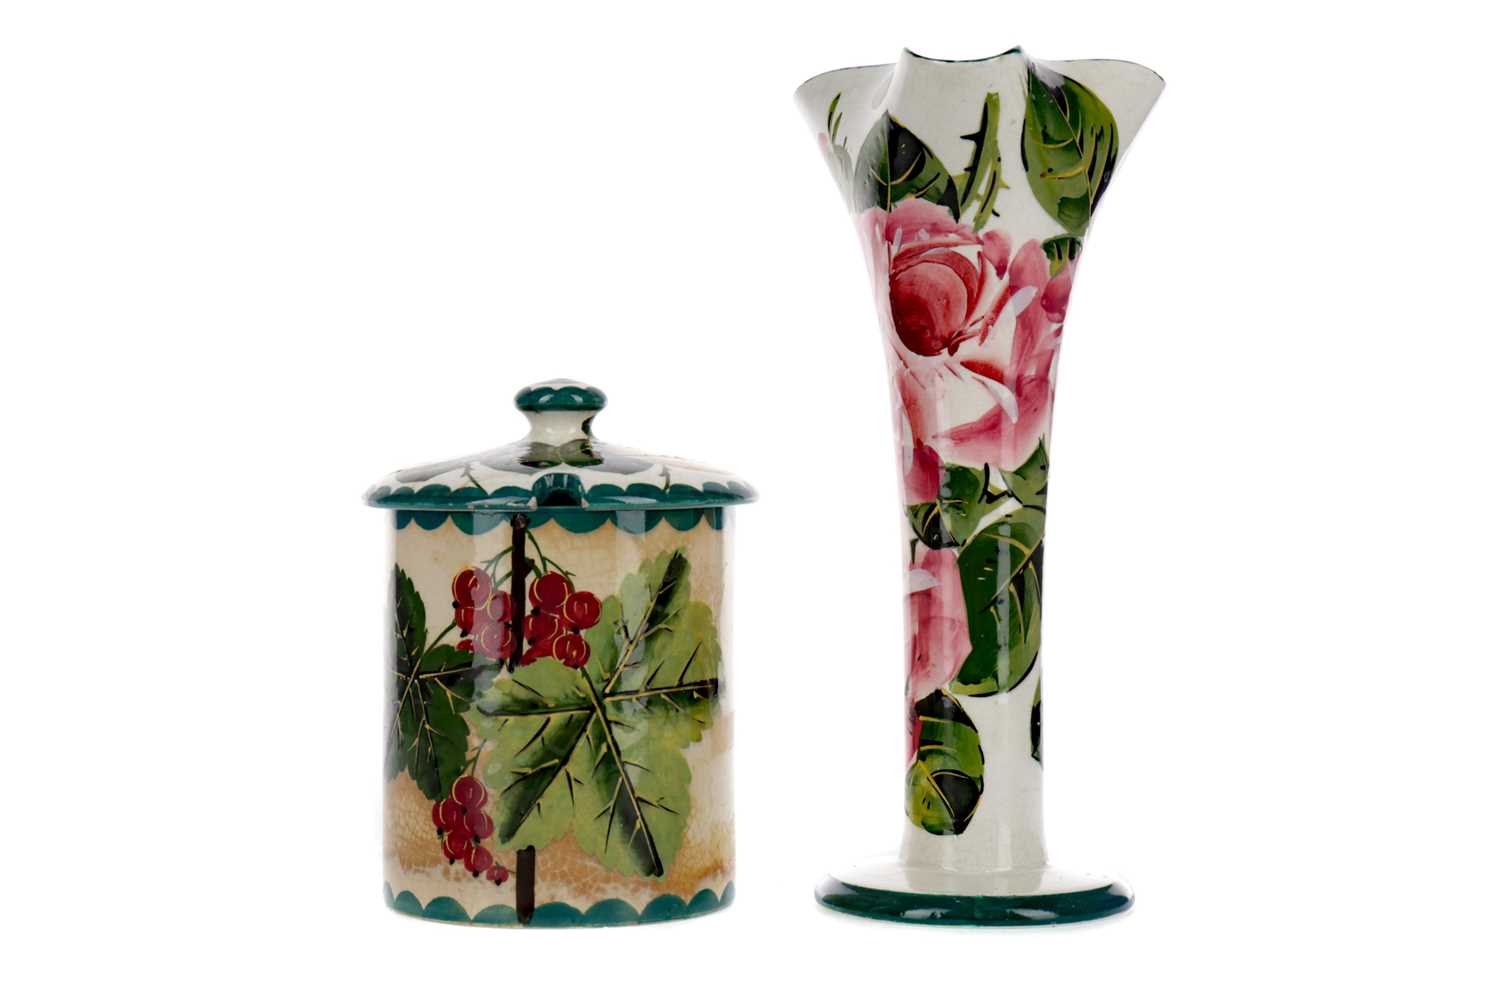 Lot 1089 - A WEMYSS WARE PRESERVE POT AND COVER, ALONG WITH A SOLIFLEUR VASE